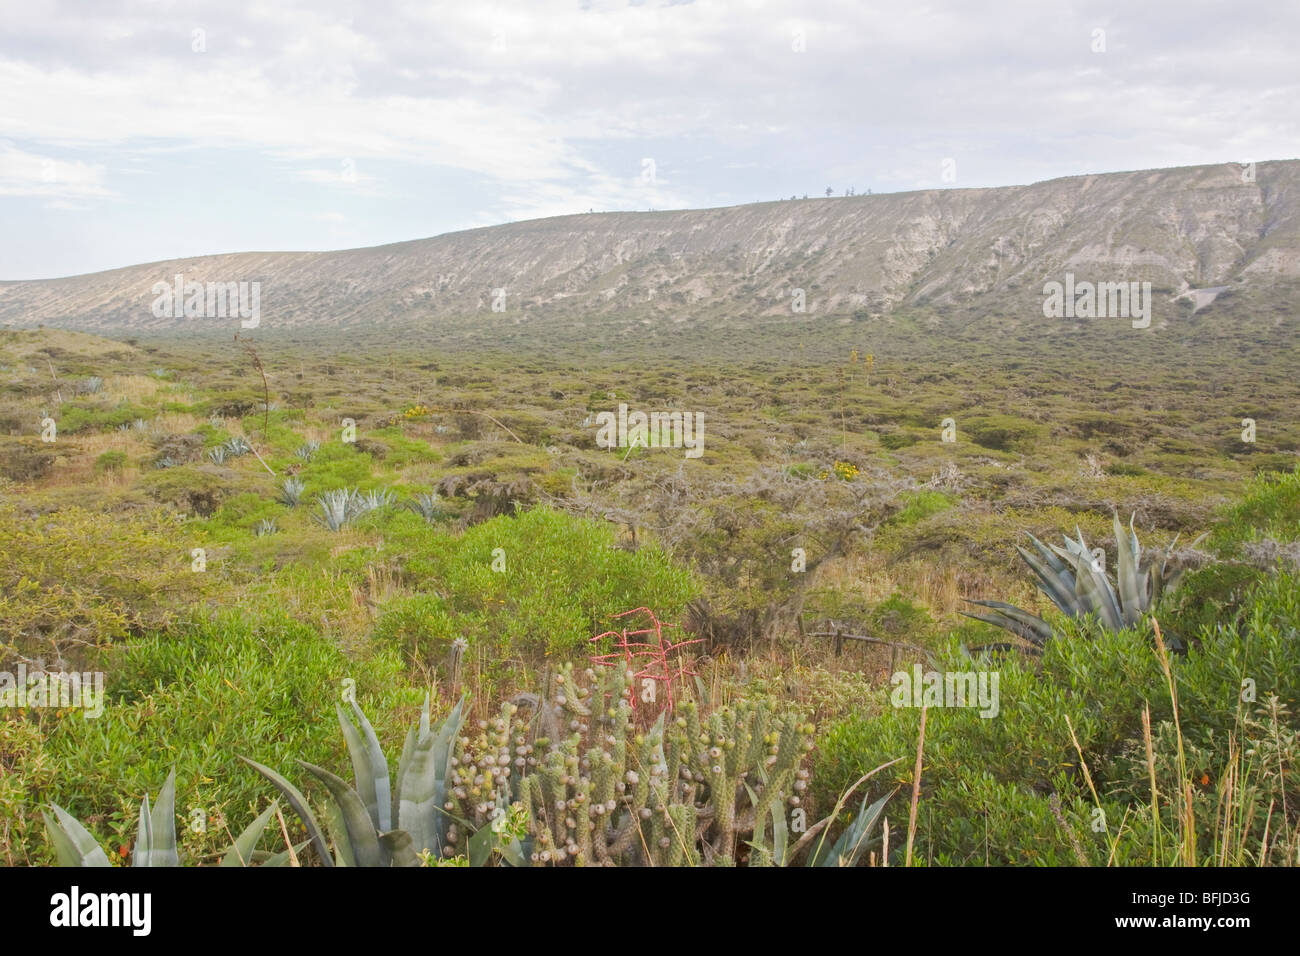 The Jerusalem protected area in central Ecuador. Stock Photo